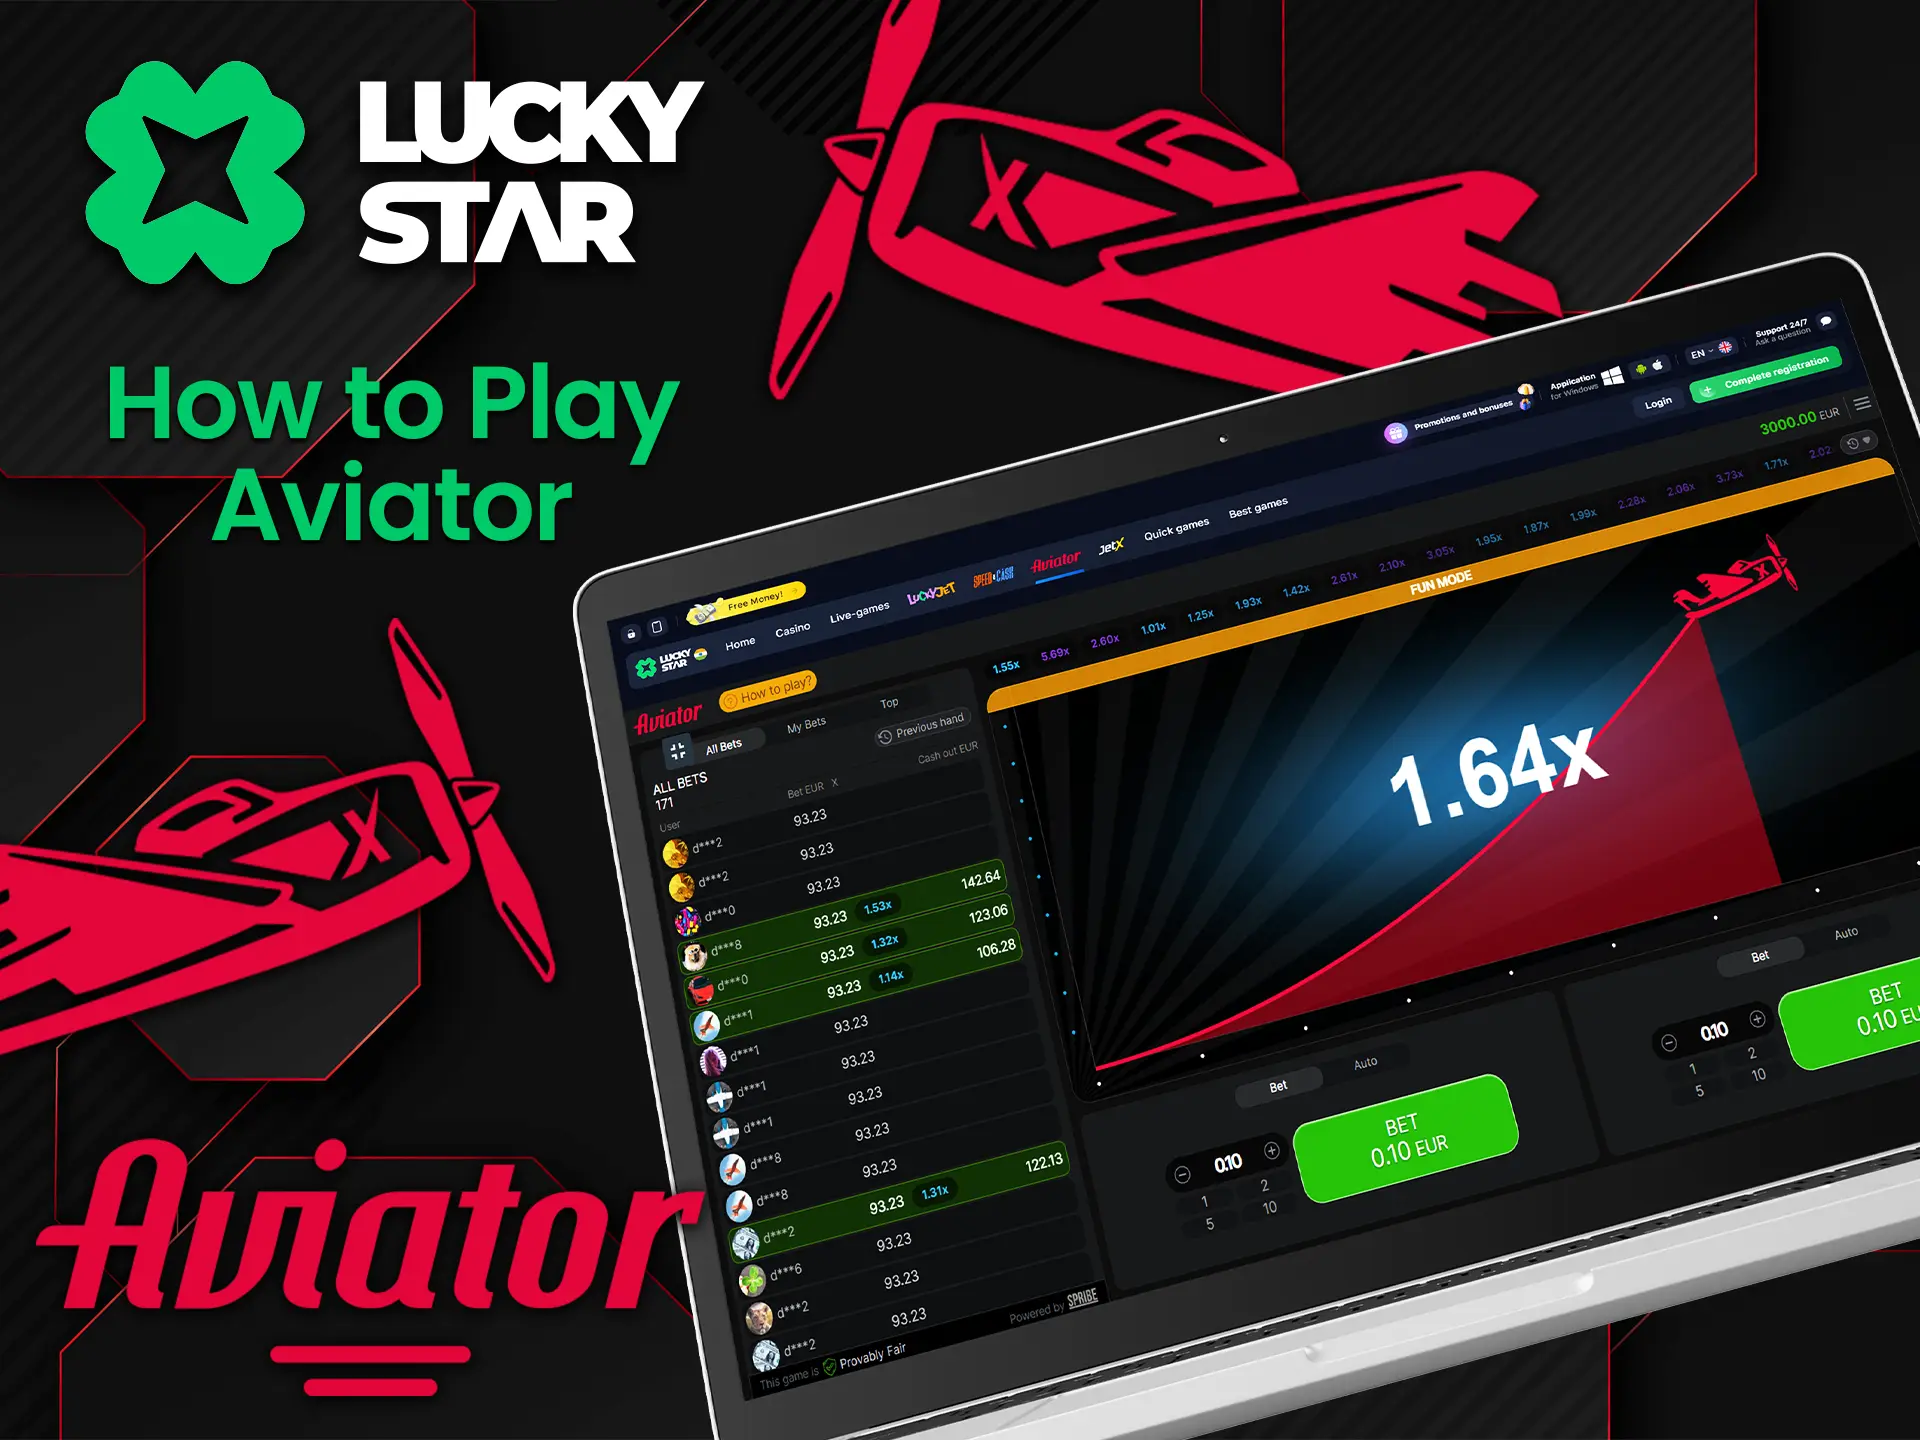 Before you start playing Aviator by Lucky Star study the rules of the game in the instructions.